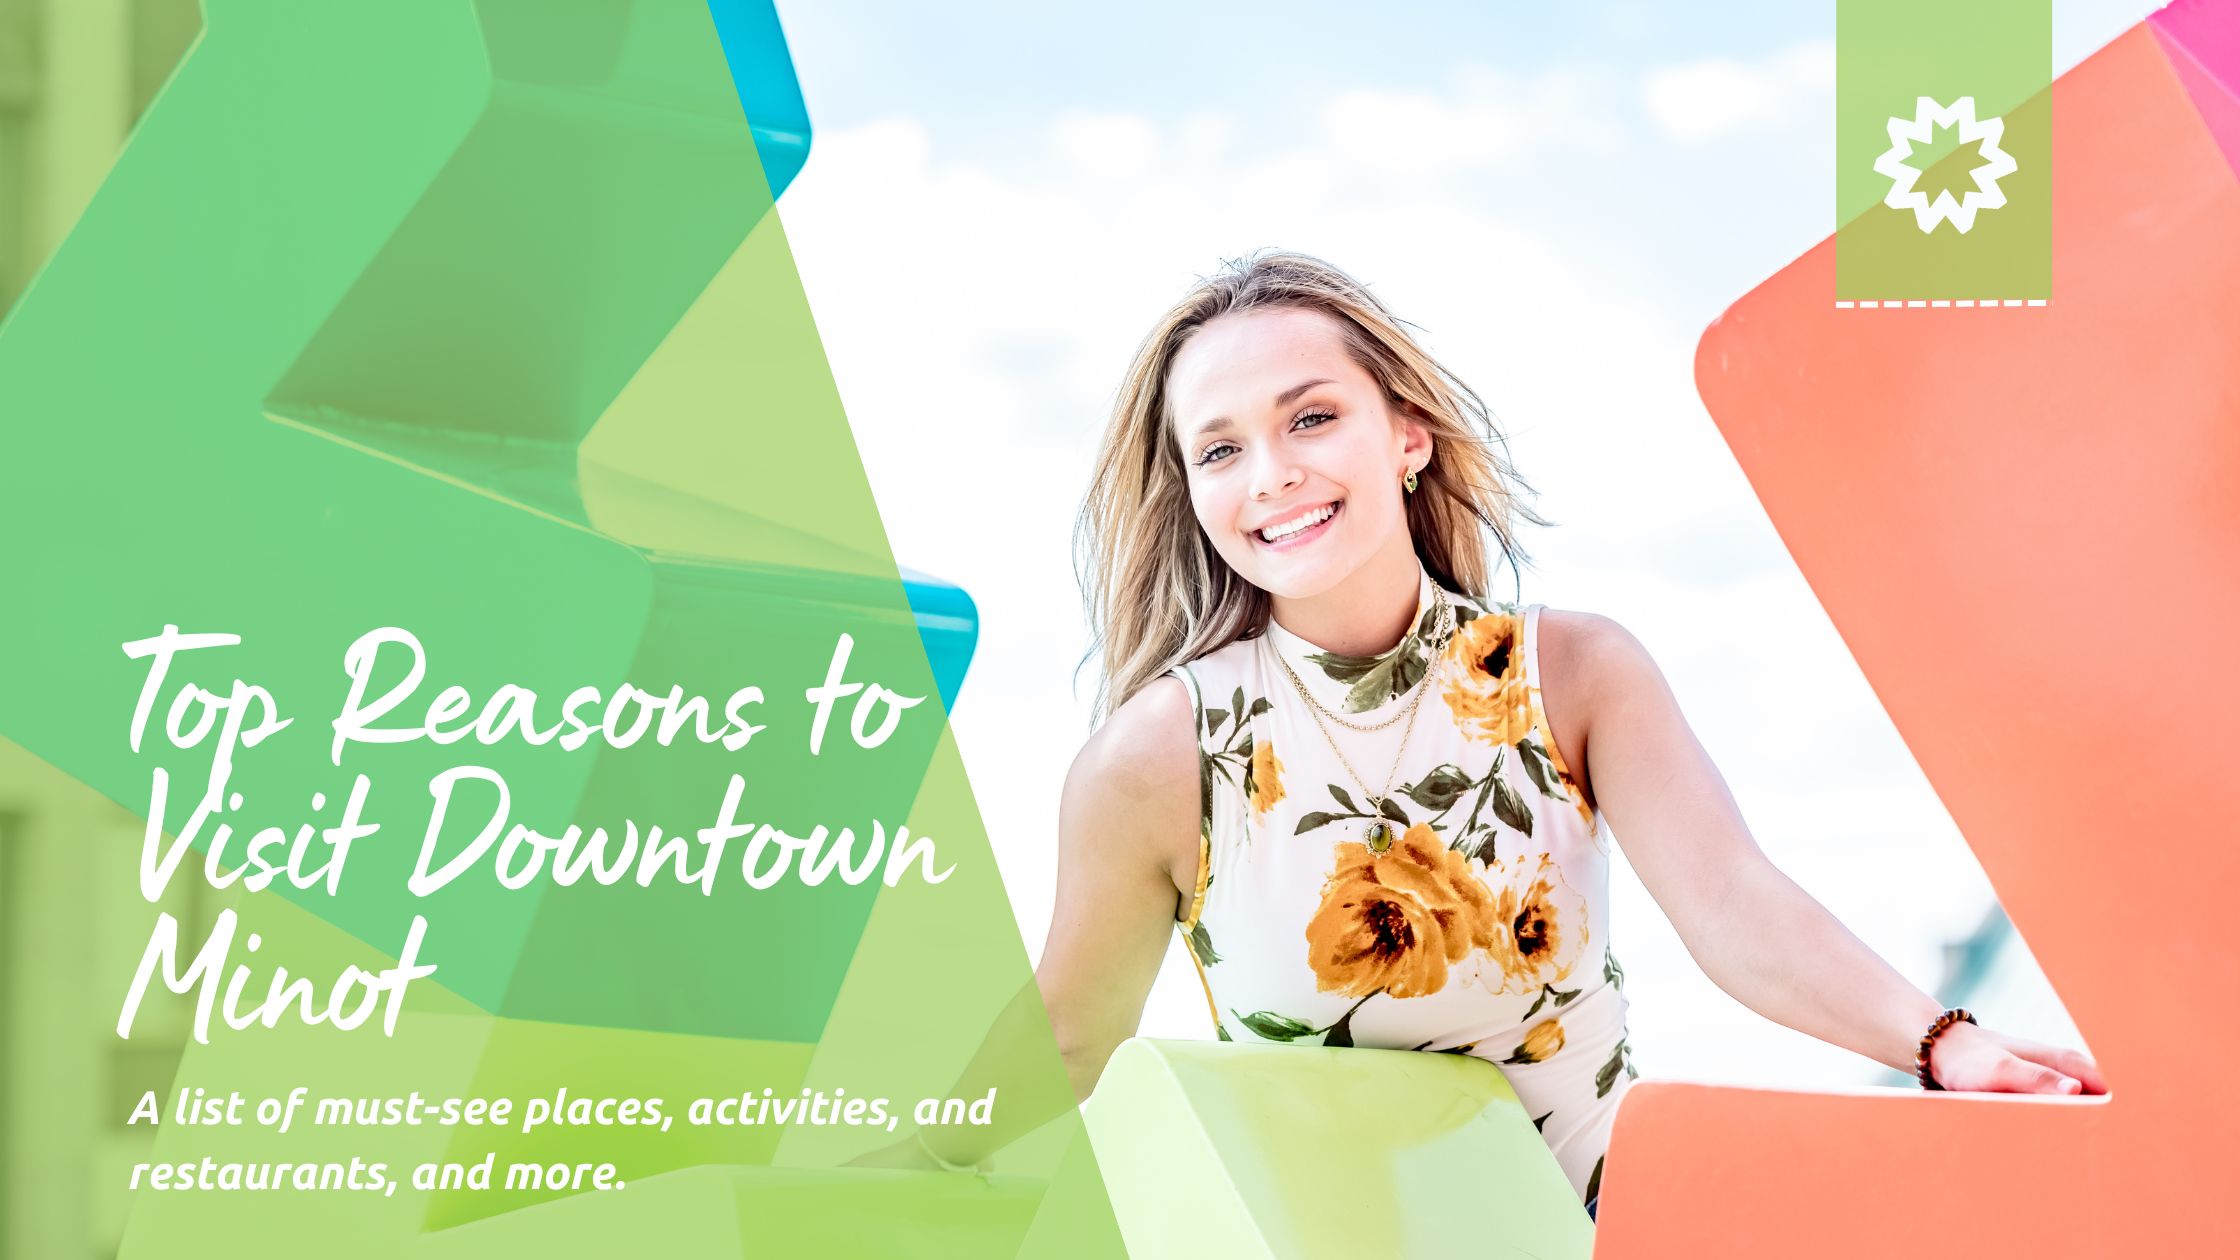 Reasons to Visit Downtown Minot